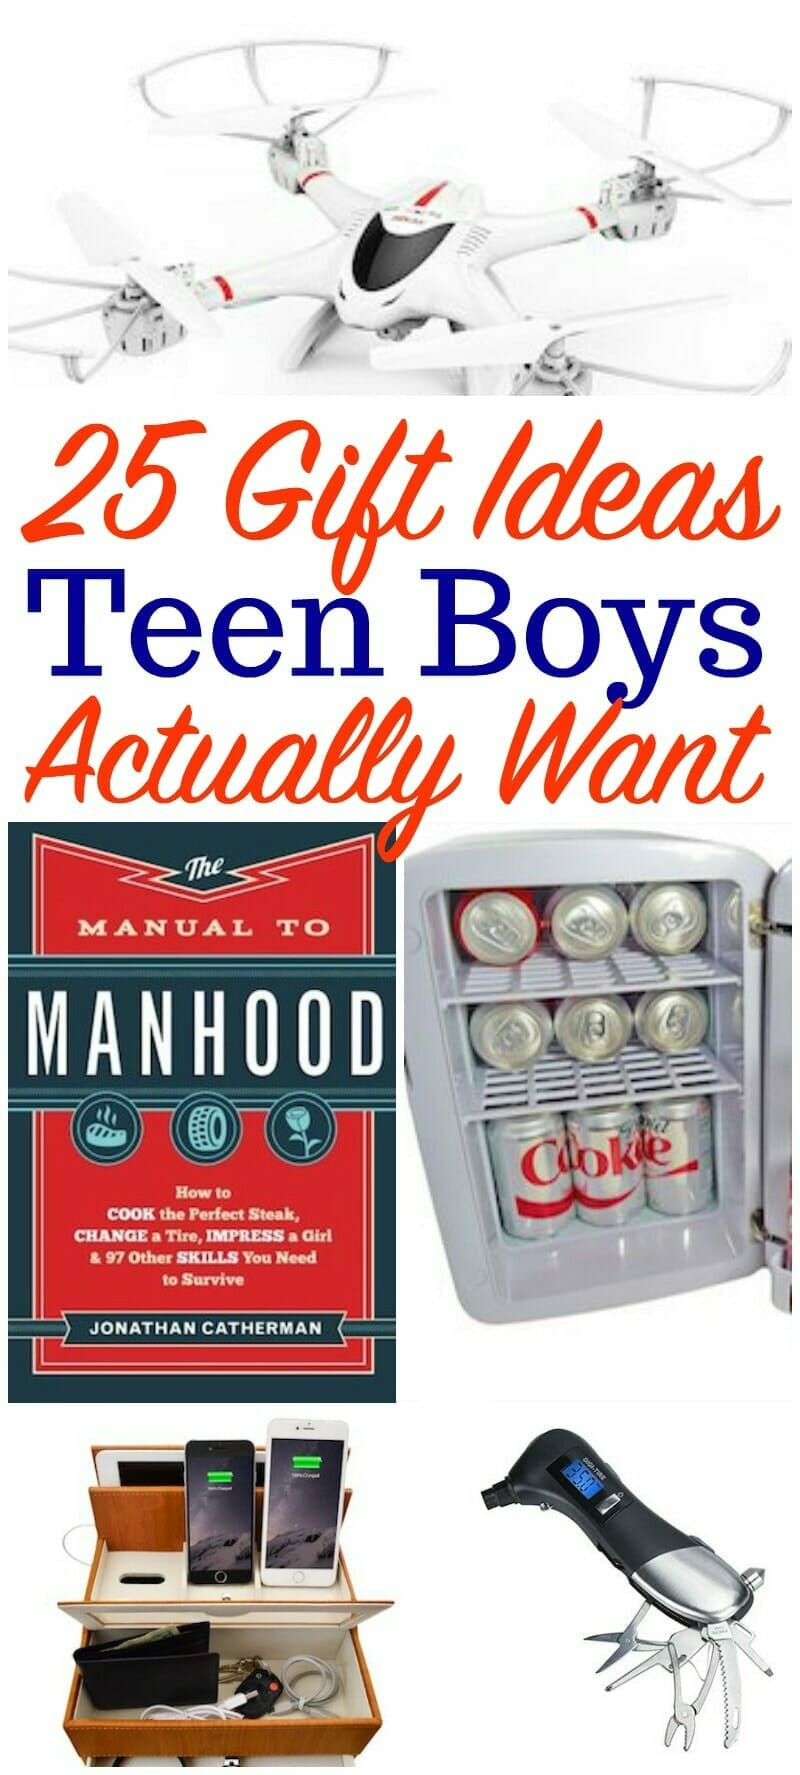 Gift Ideas For Teenager Boys
 25 Teen Boy Gift Ideas Perfect for Christmas or Birthday